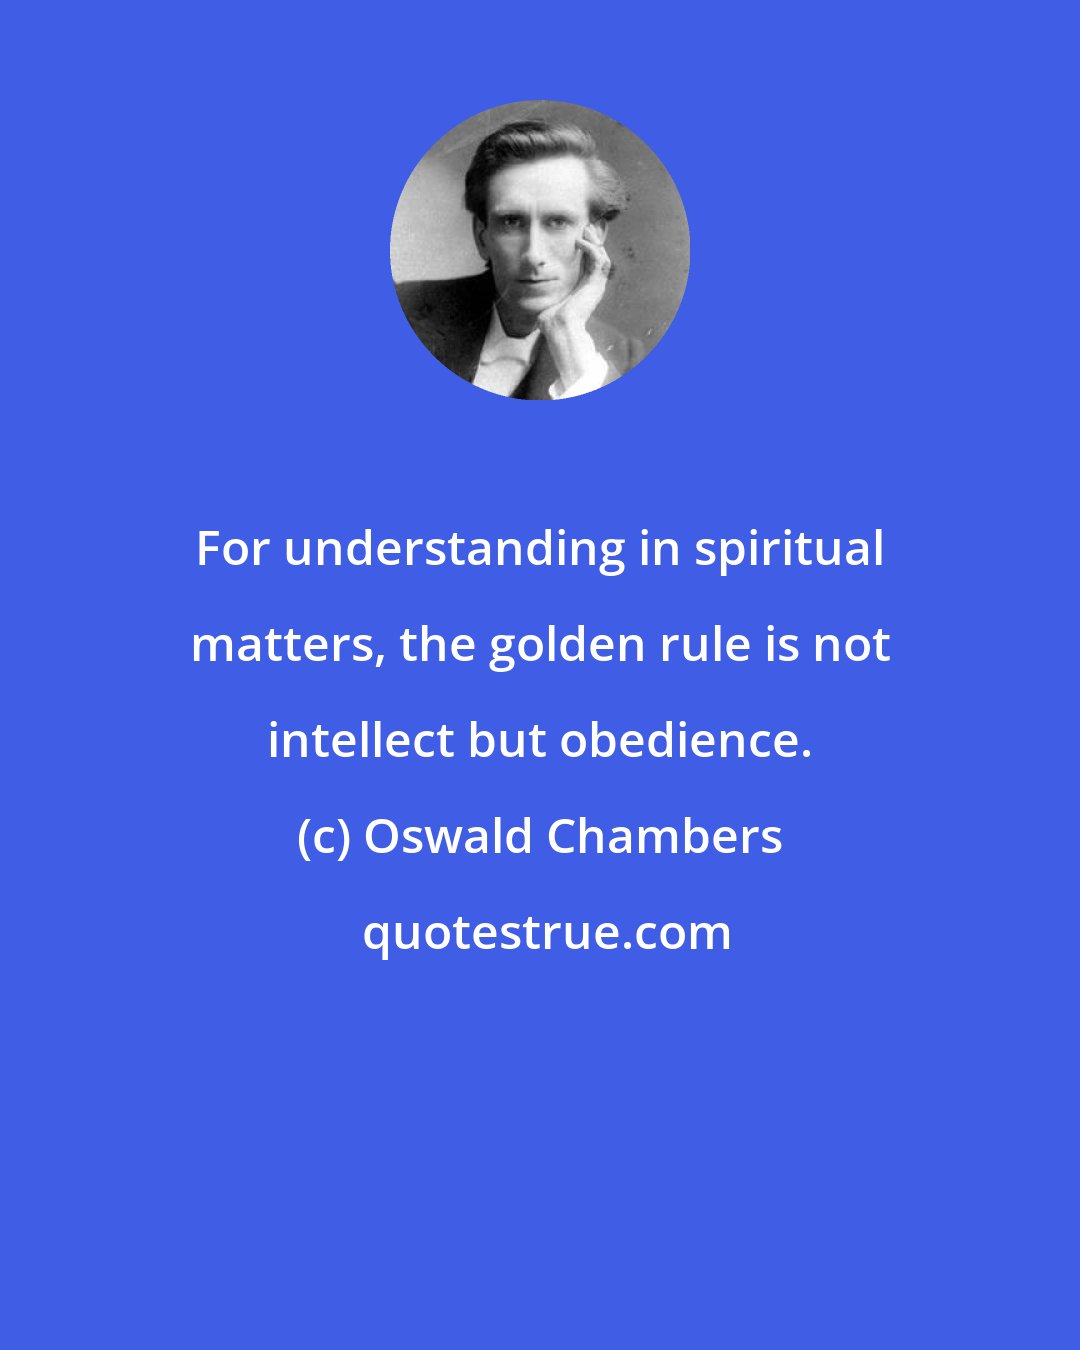 Oswald Chambers: For understanding in spiritual matters, the golden rule is not intellect but obedience.